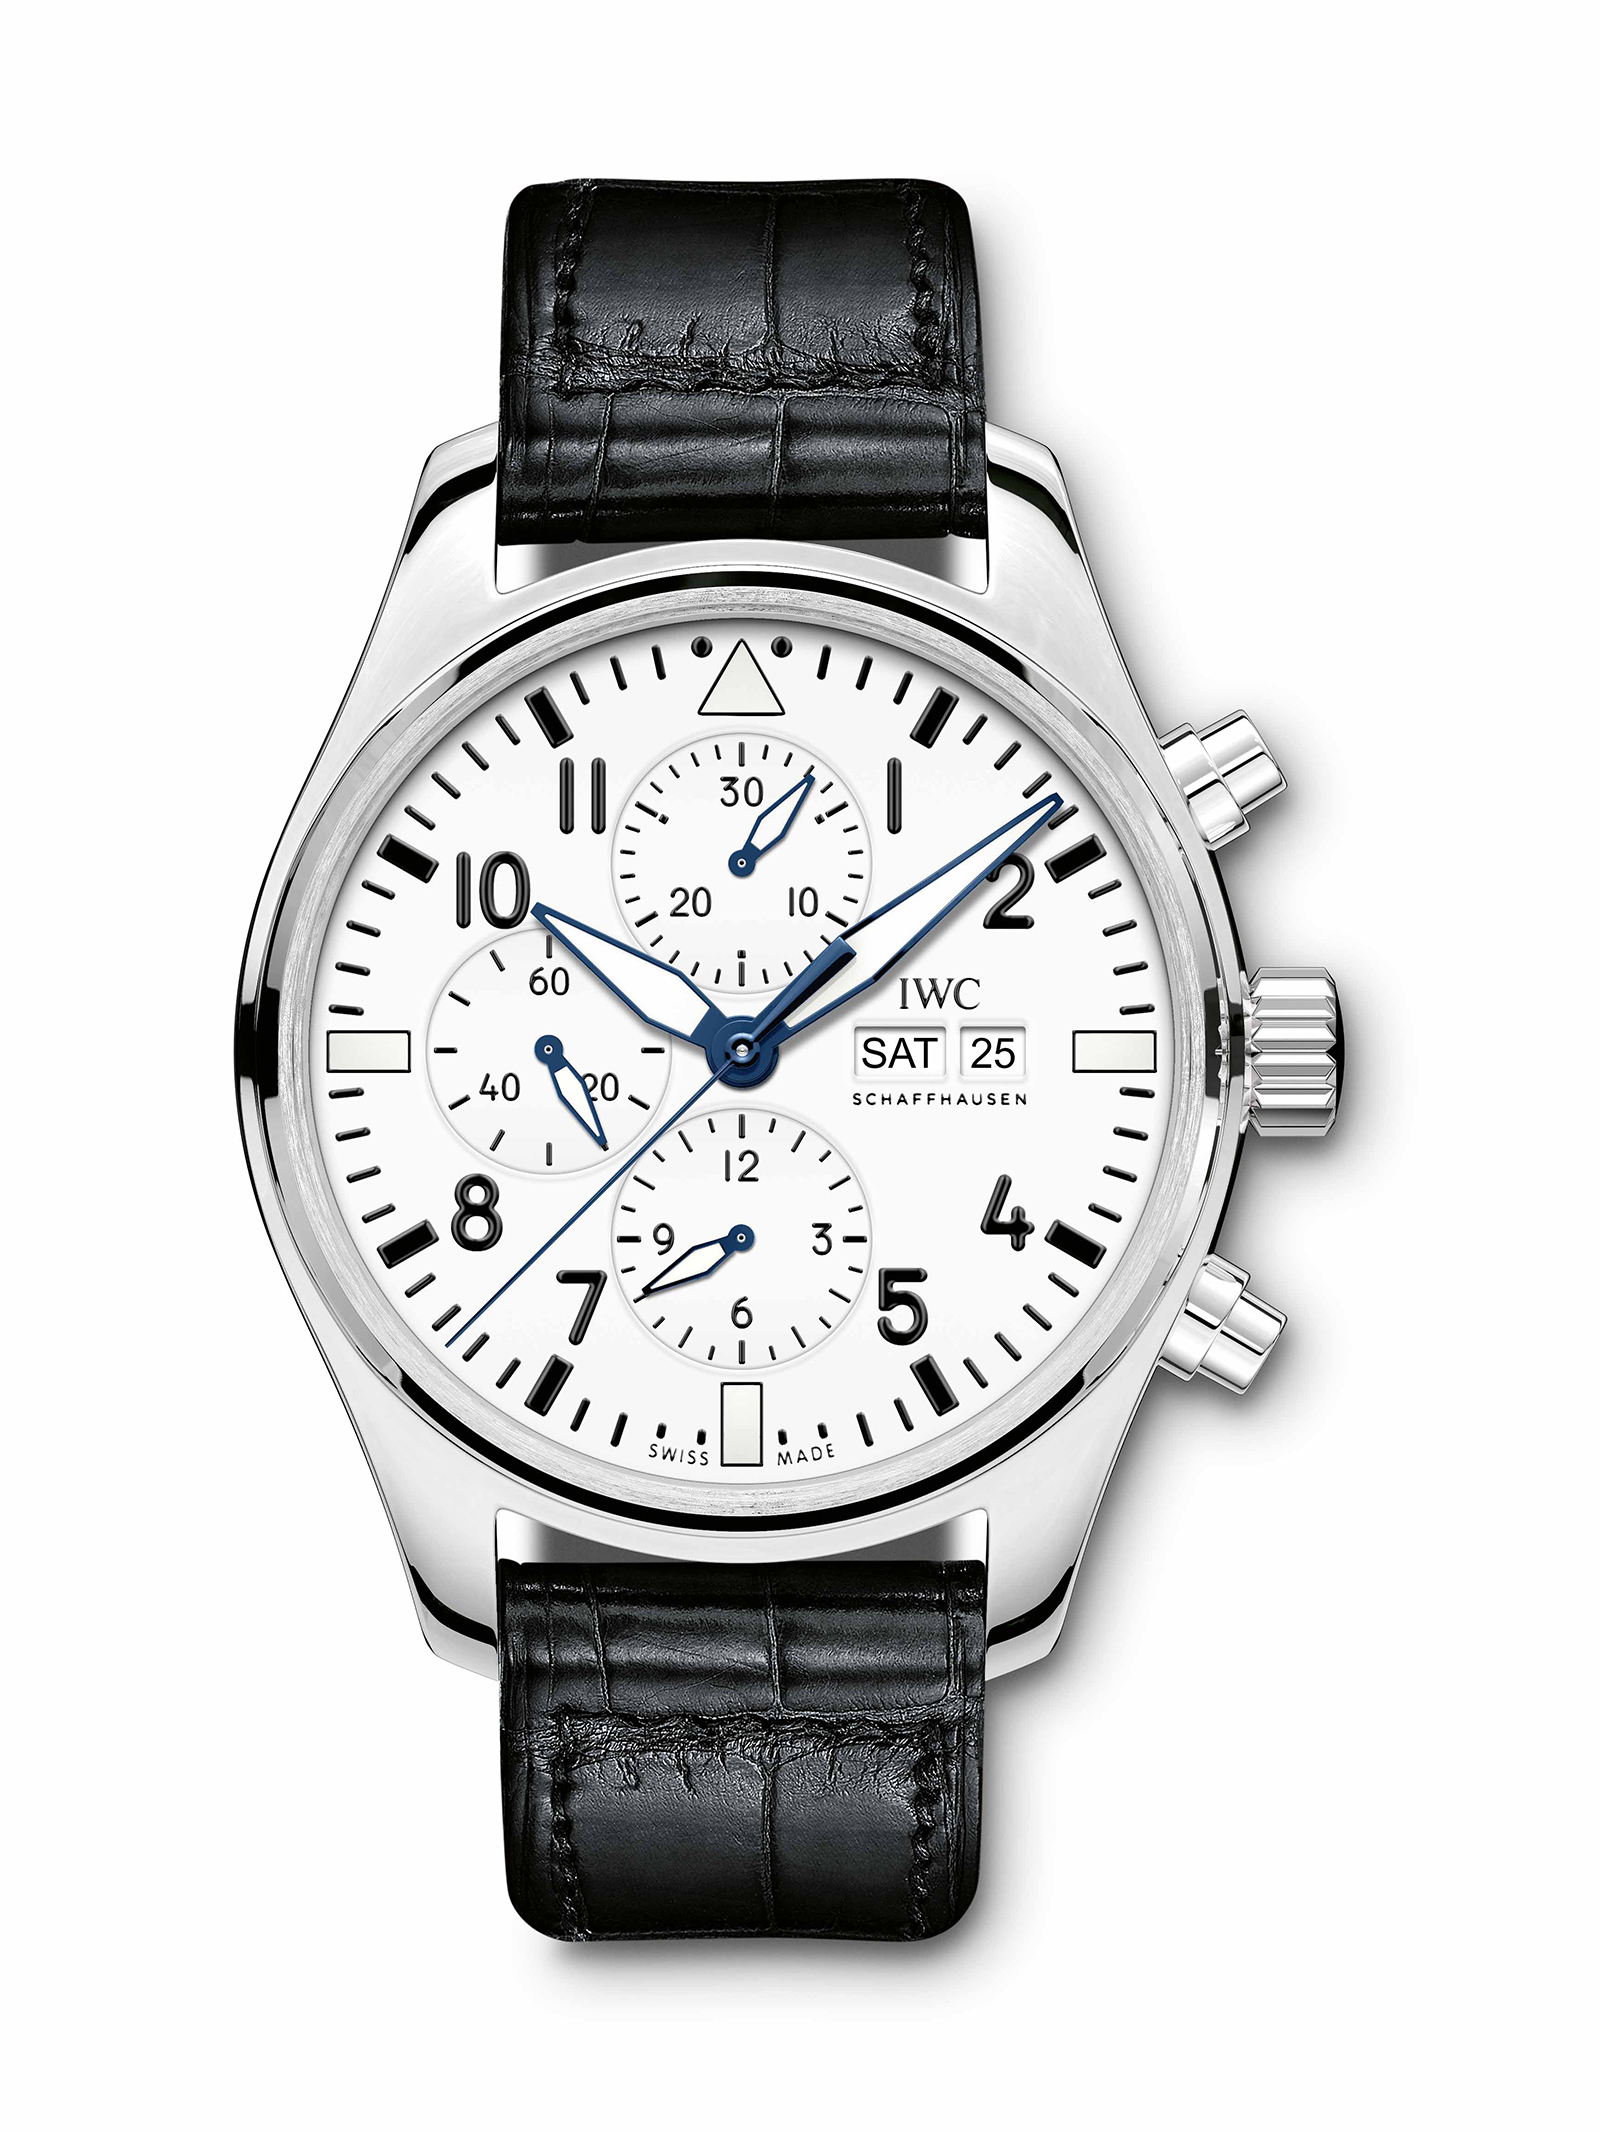 Pilot’s Watch Chronograph Edition “150 Years”